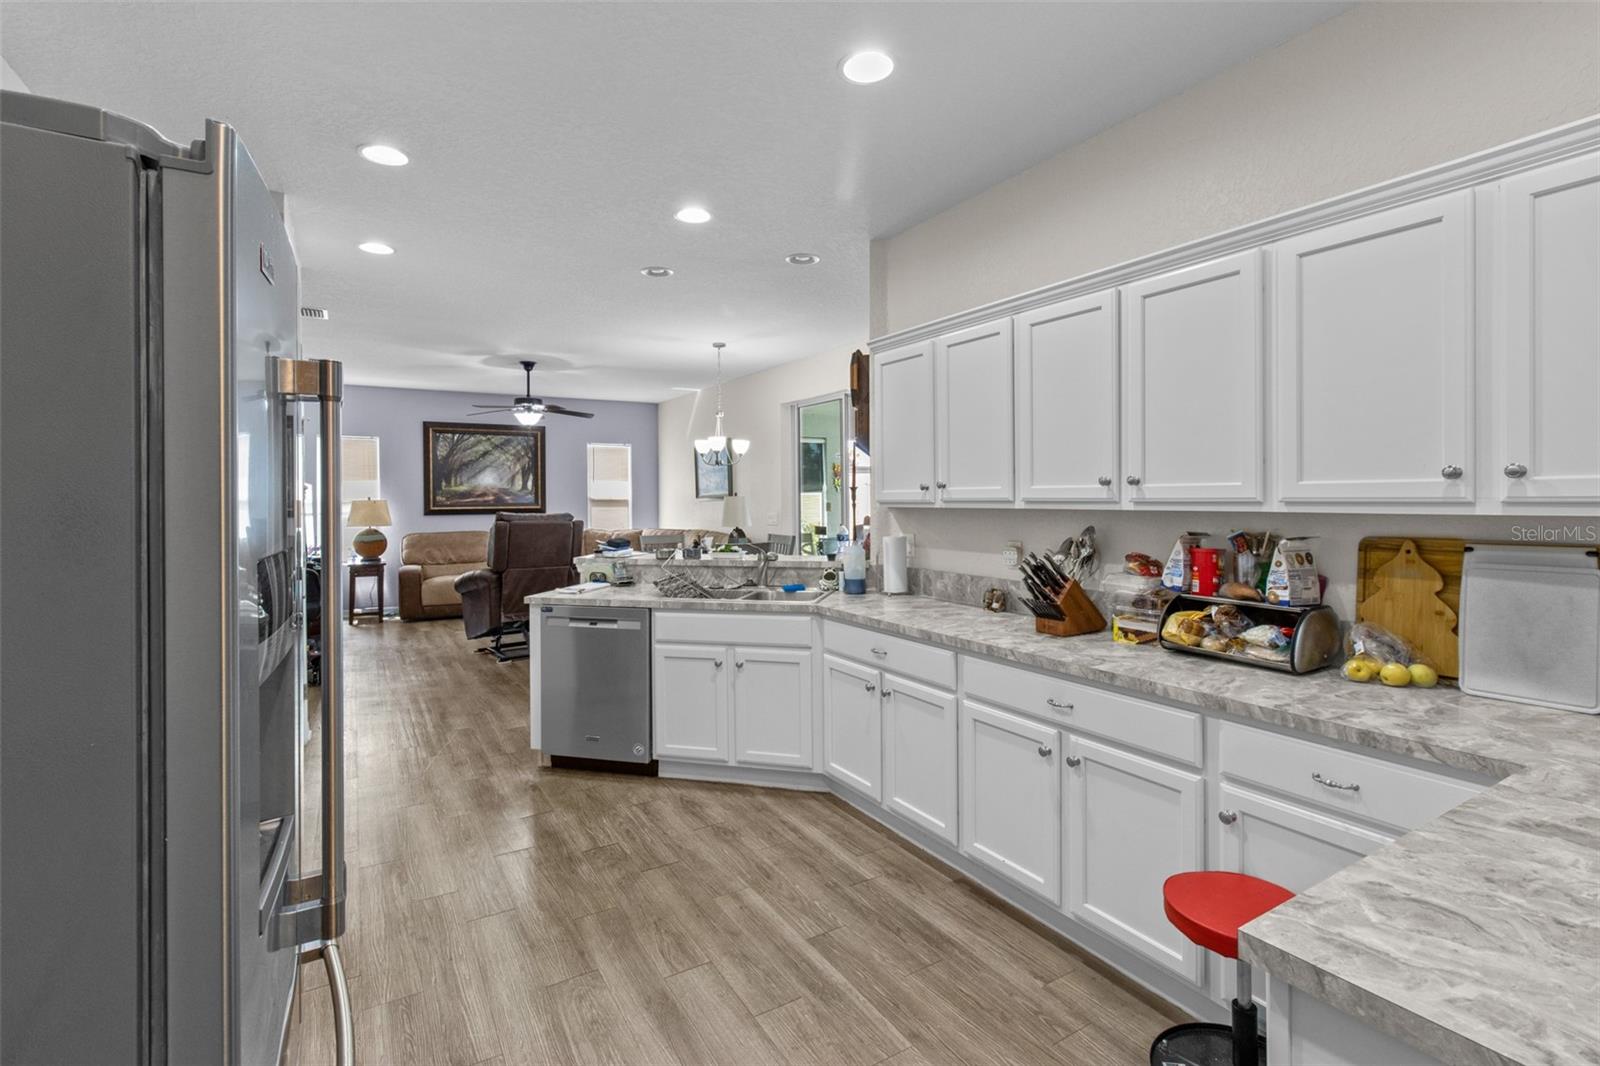 Room for more than one cook in this spacious kitchen.